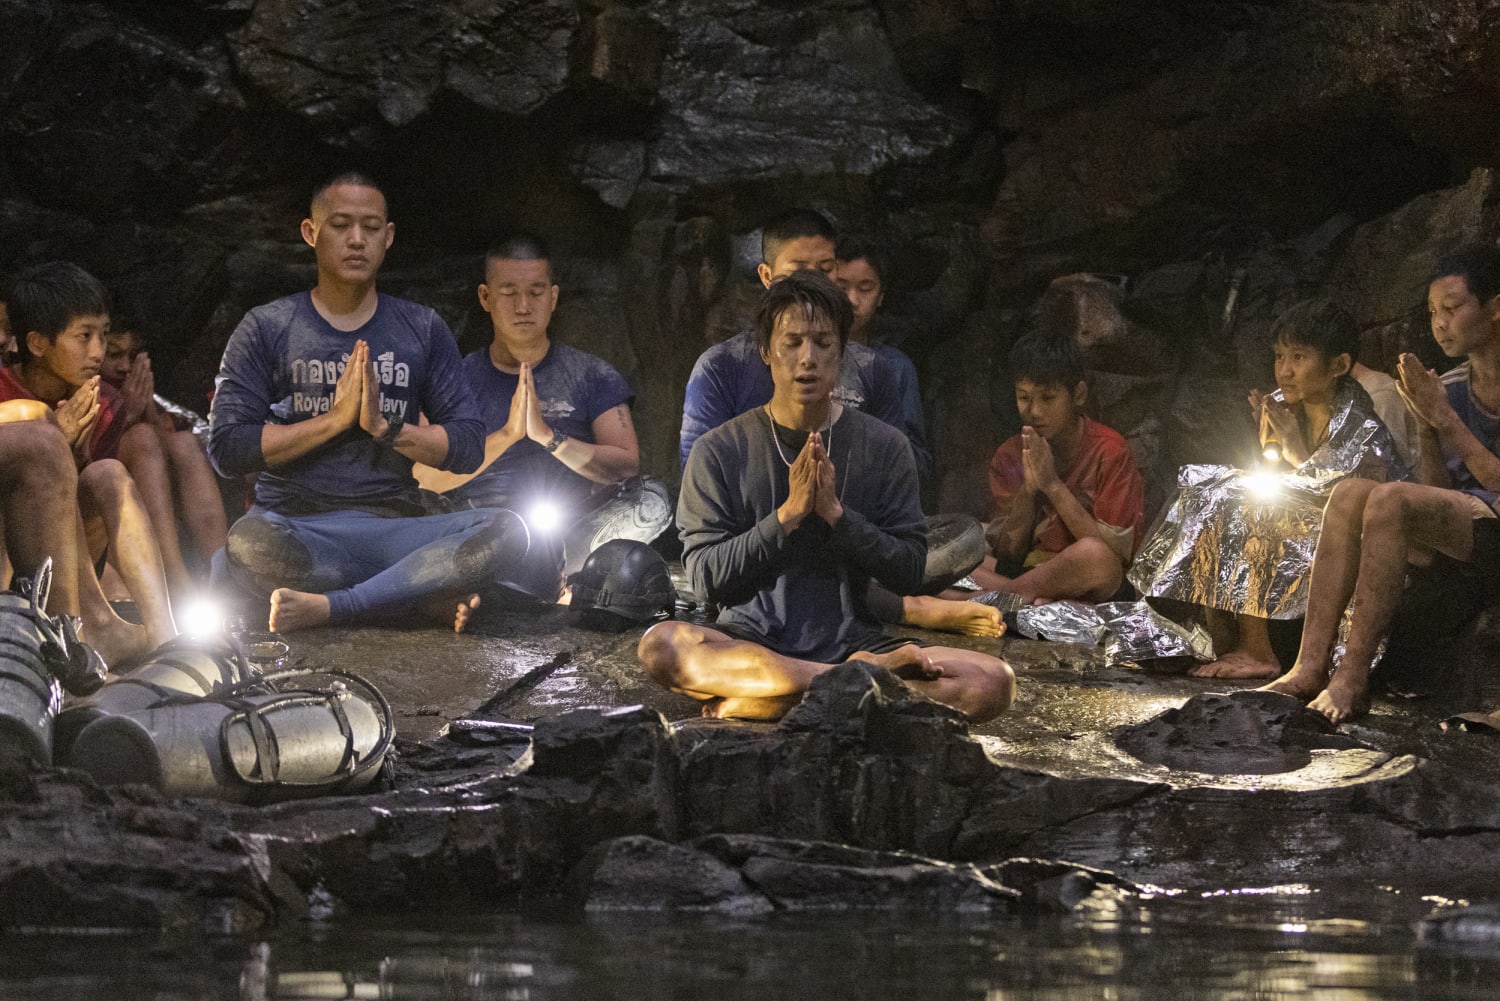 'Thirteen Lives' tells the story of a Thai rescue mission from a Thai perspective